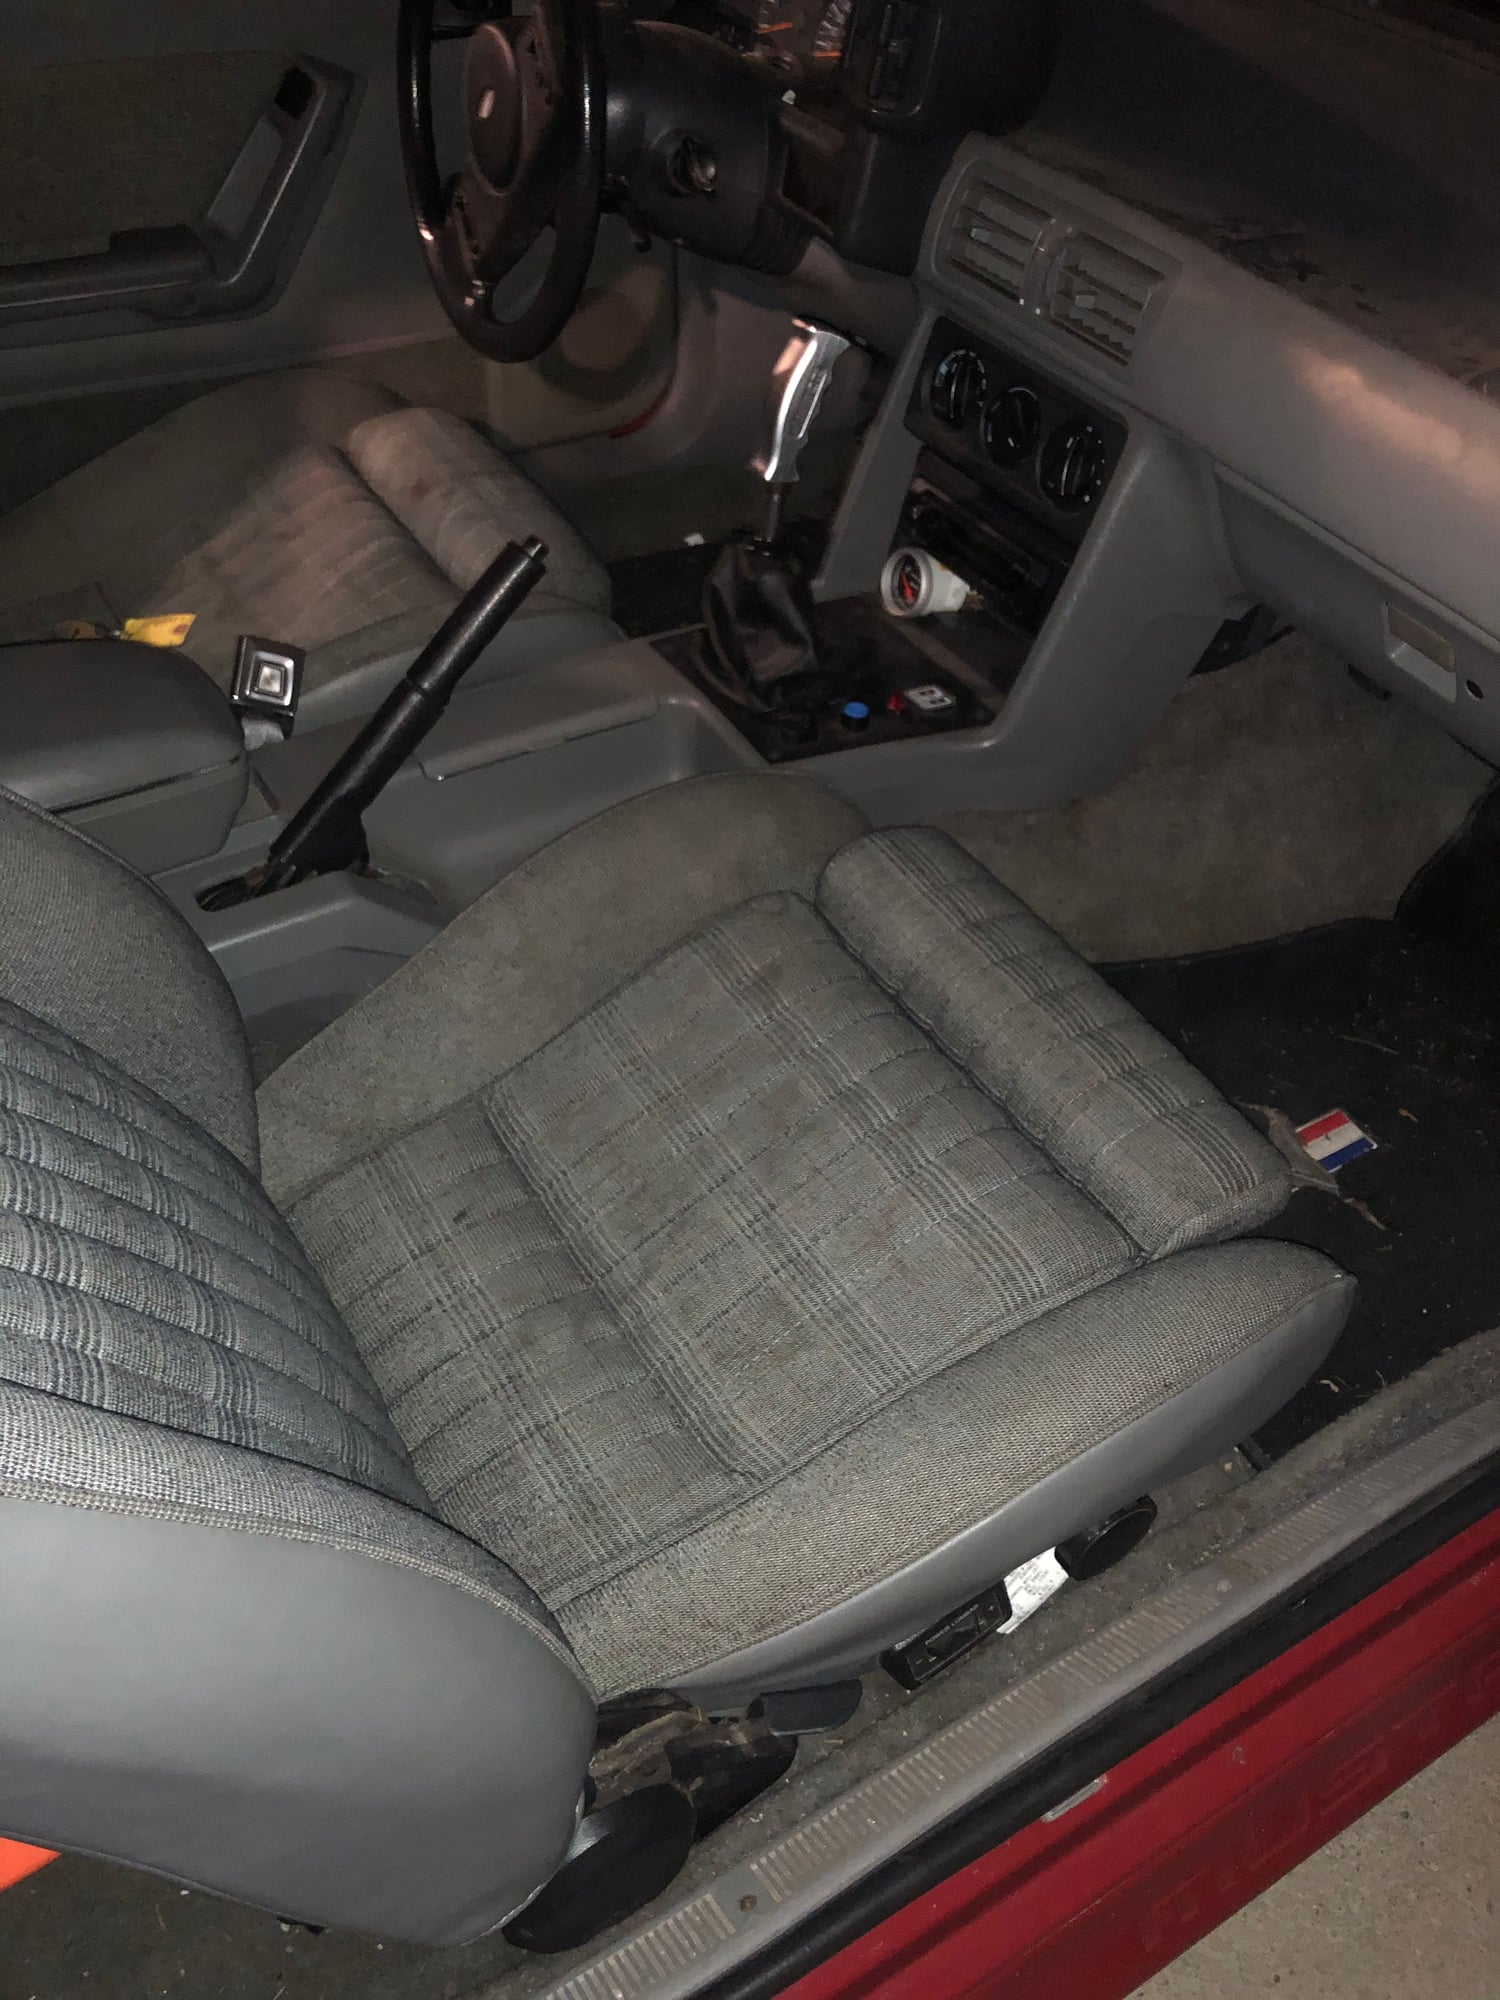 1988 Ford Mustang - 1988 Ford Mustang cammed ls1 lots of goodies - Used - VIN 1fabp42e4jf149794 - 55,000 Miles - 8 cyl - 2WD - Manual - Hatchback - Red - Bangor, ME 04401, United States